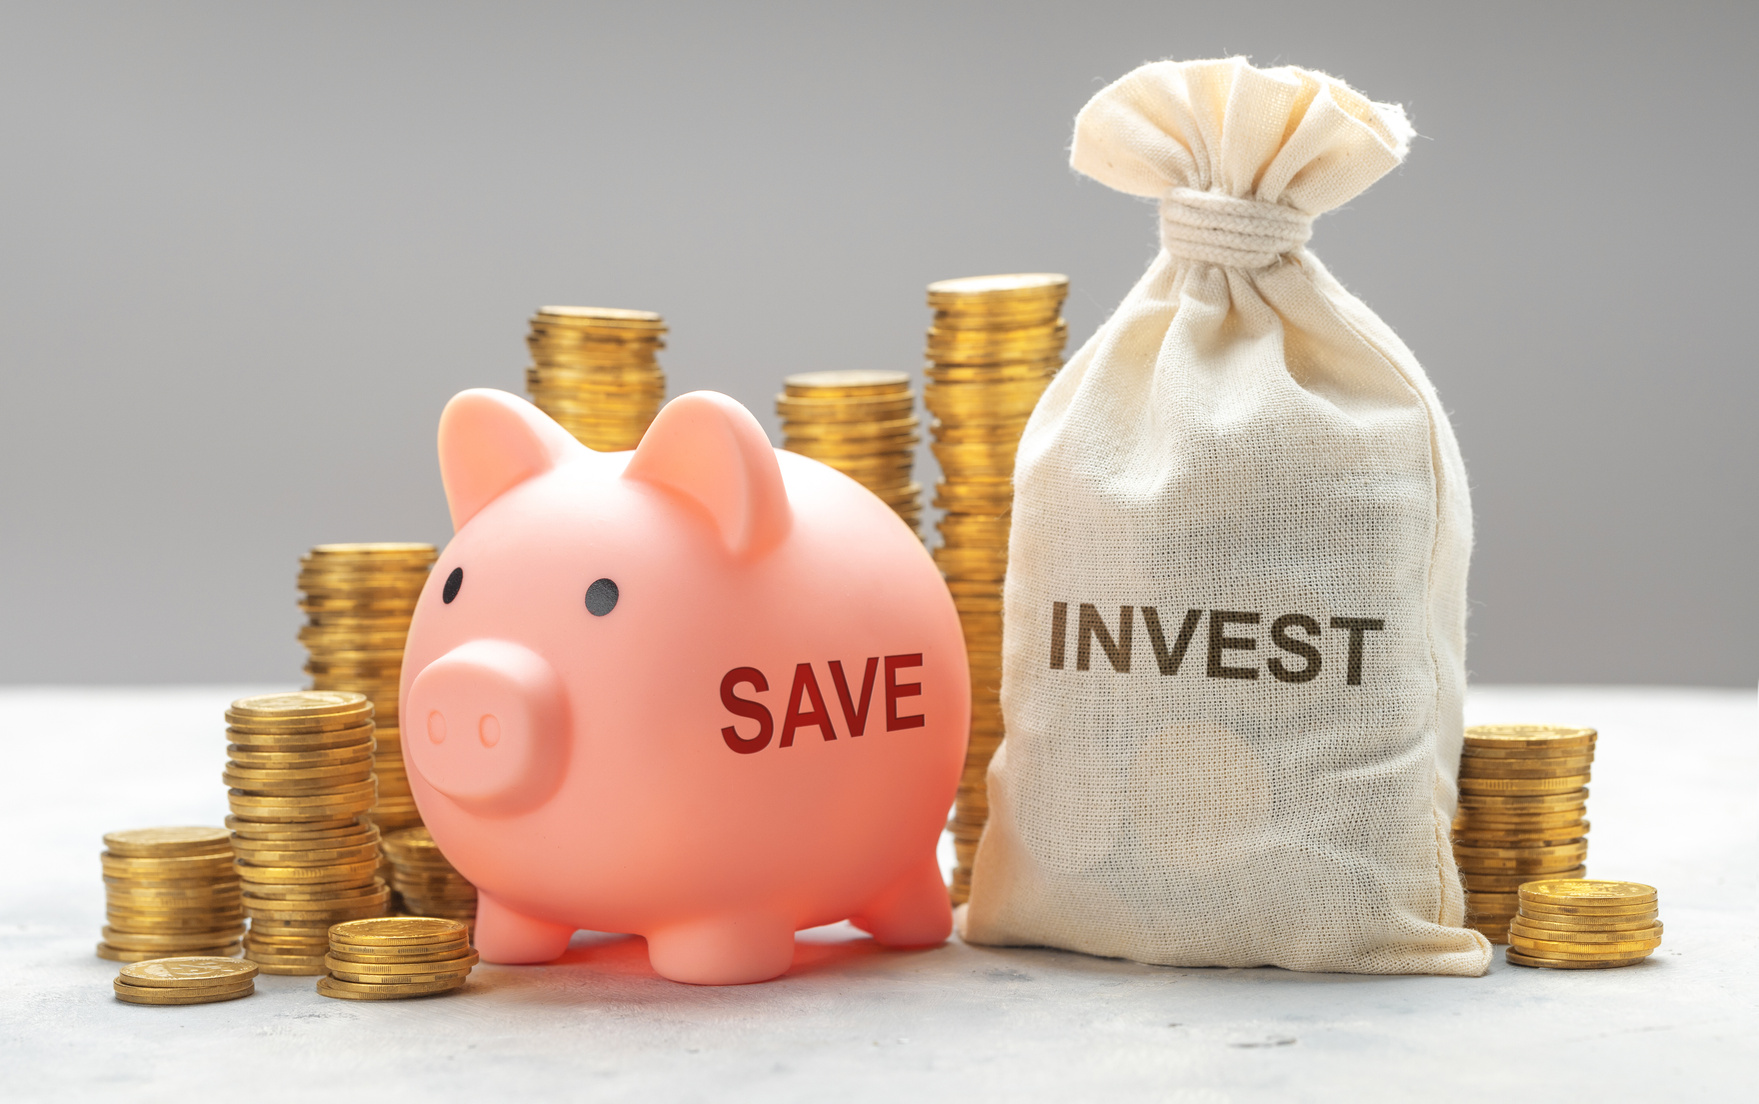 Investment or Savings. Piggy Bank for Savings and Money Bag for Investments